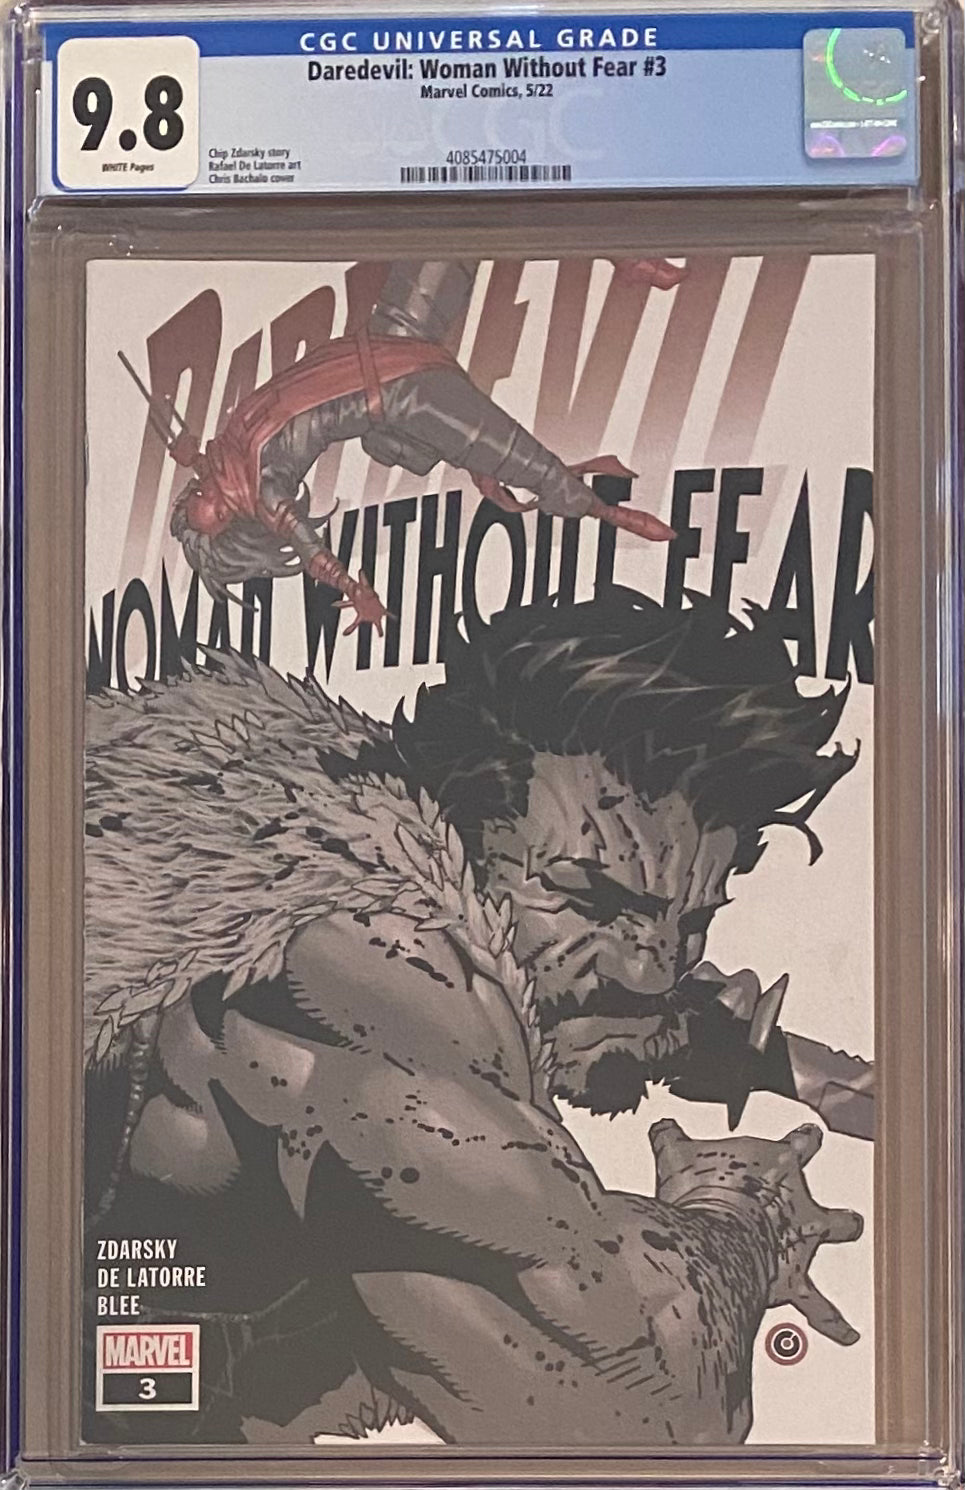 Daredevil: Woman Without Fear #3 CGC 9.8